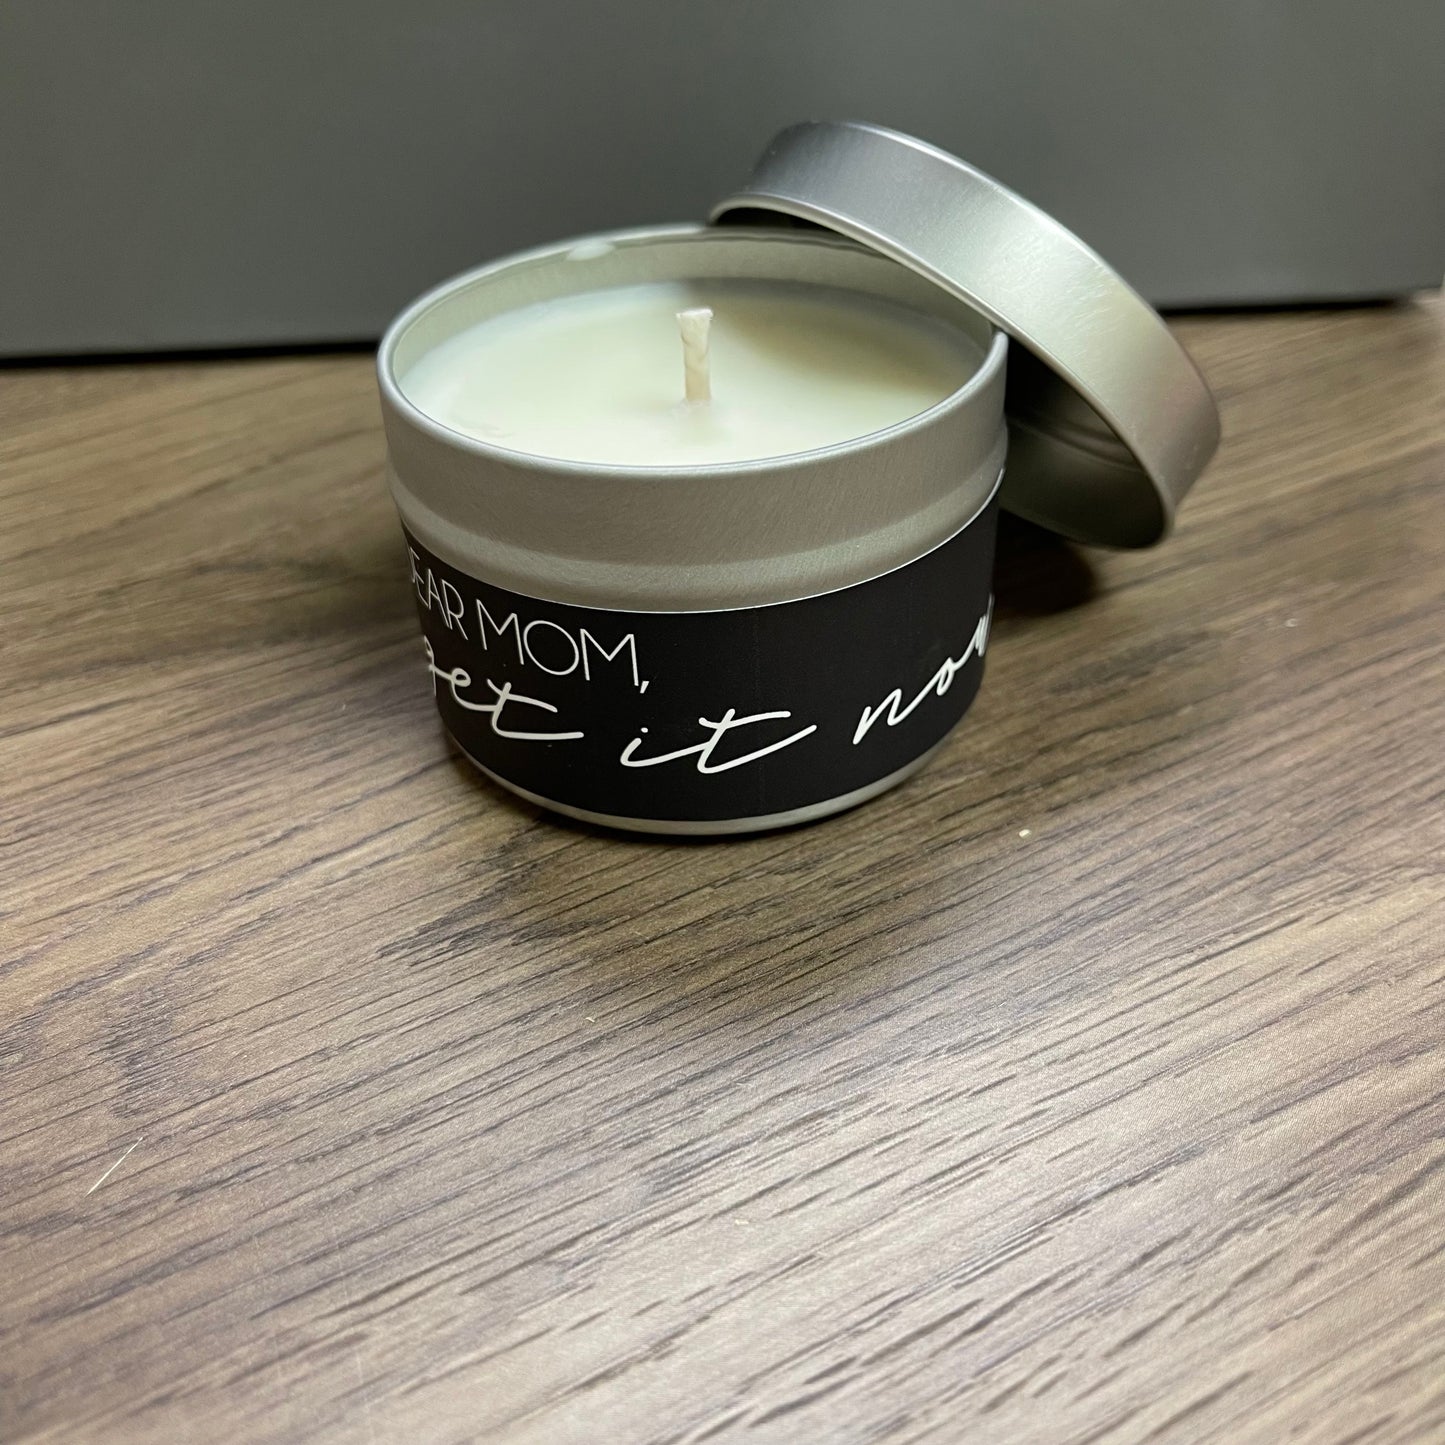 Made with a custom blend of 100% natural coconut wax and soy wax, 100% natural cotton wicks, premium fragrance and essential oils home scent air freshener home decor dear mom